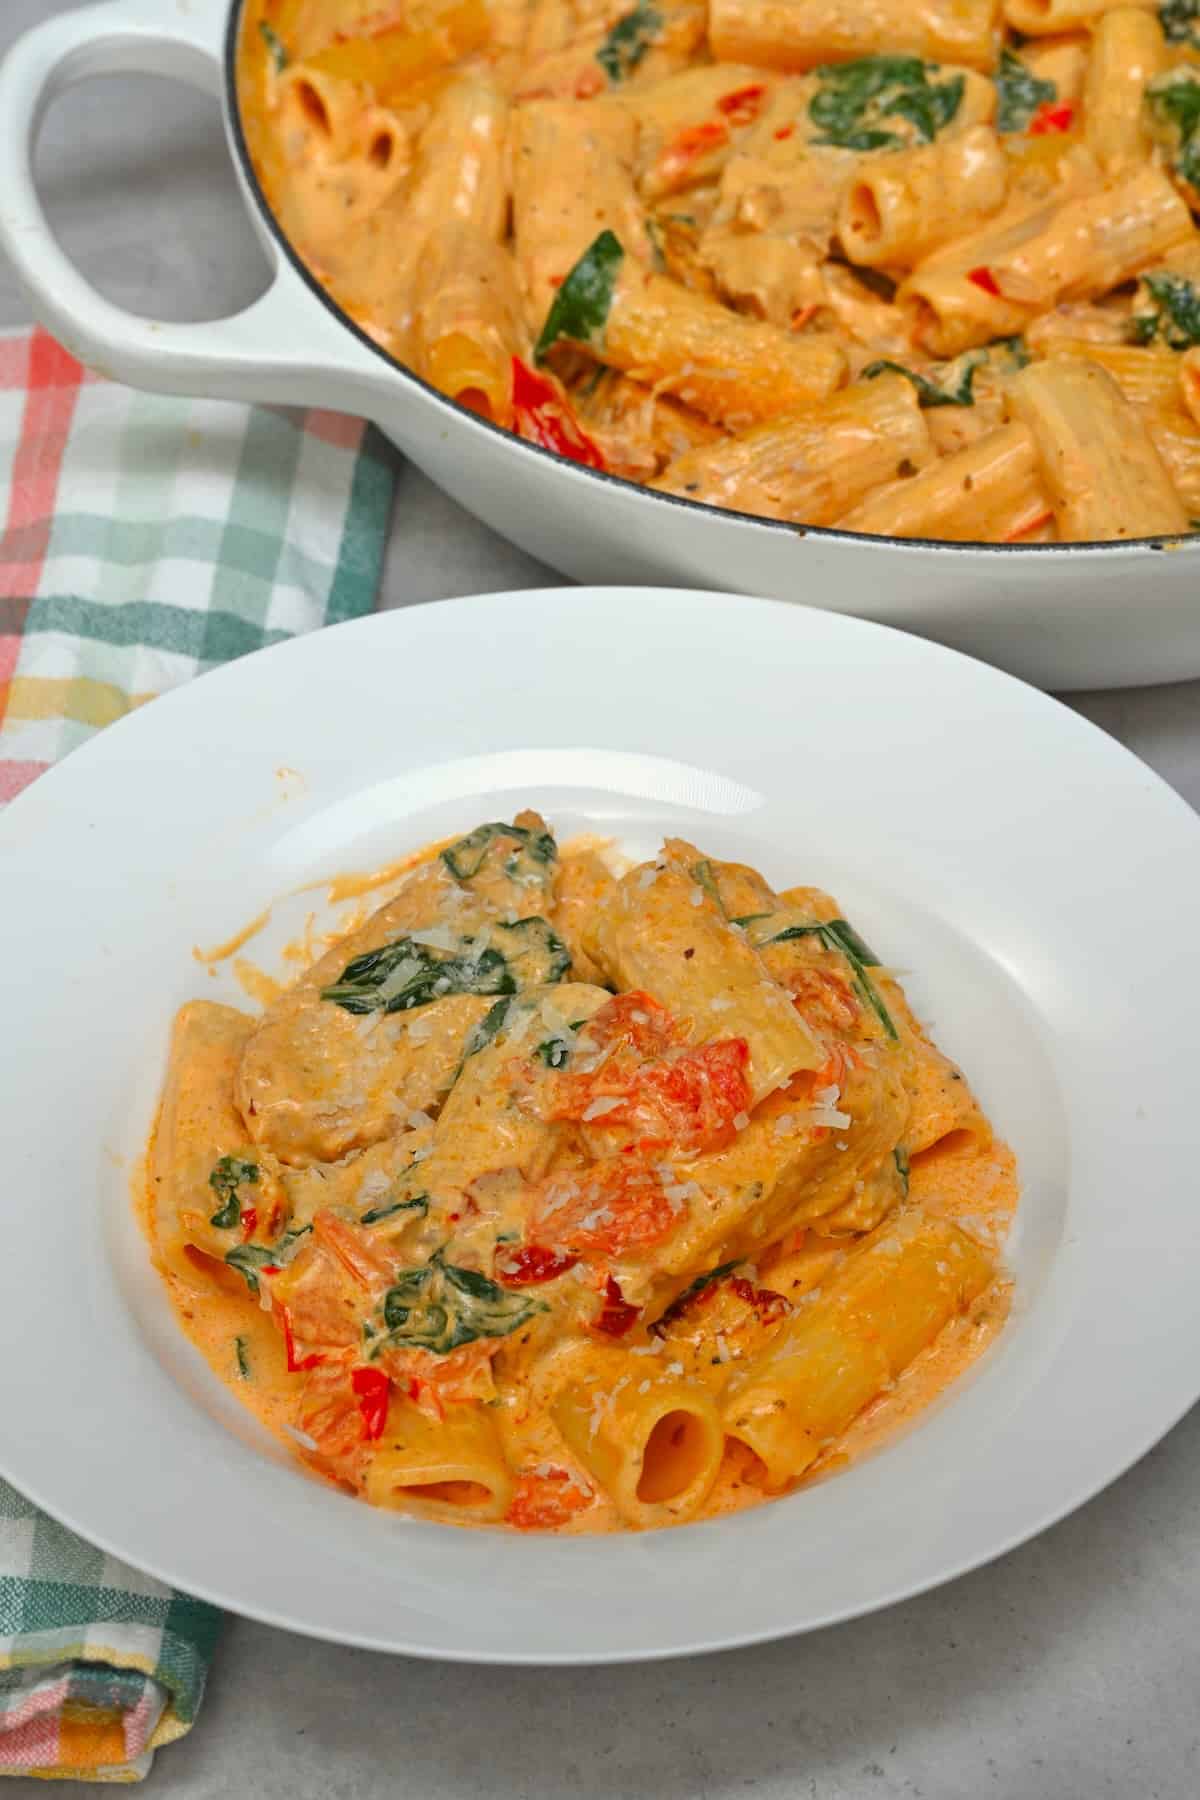 A serving of Tuscan chicken pasta